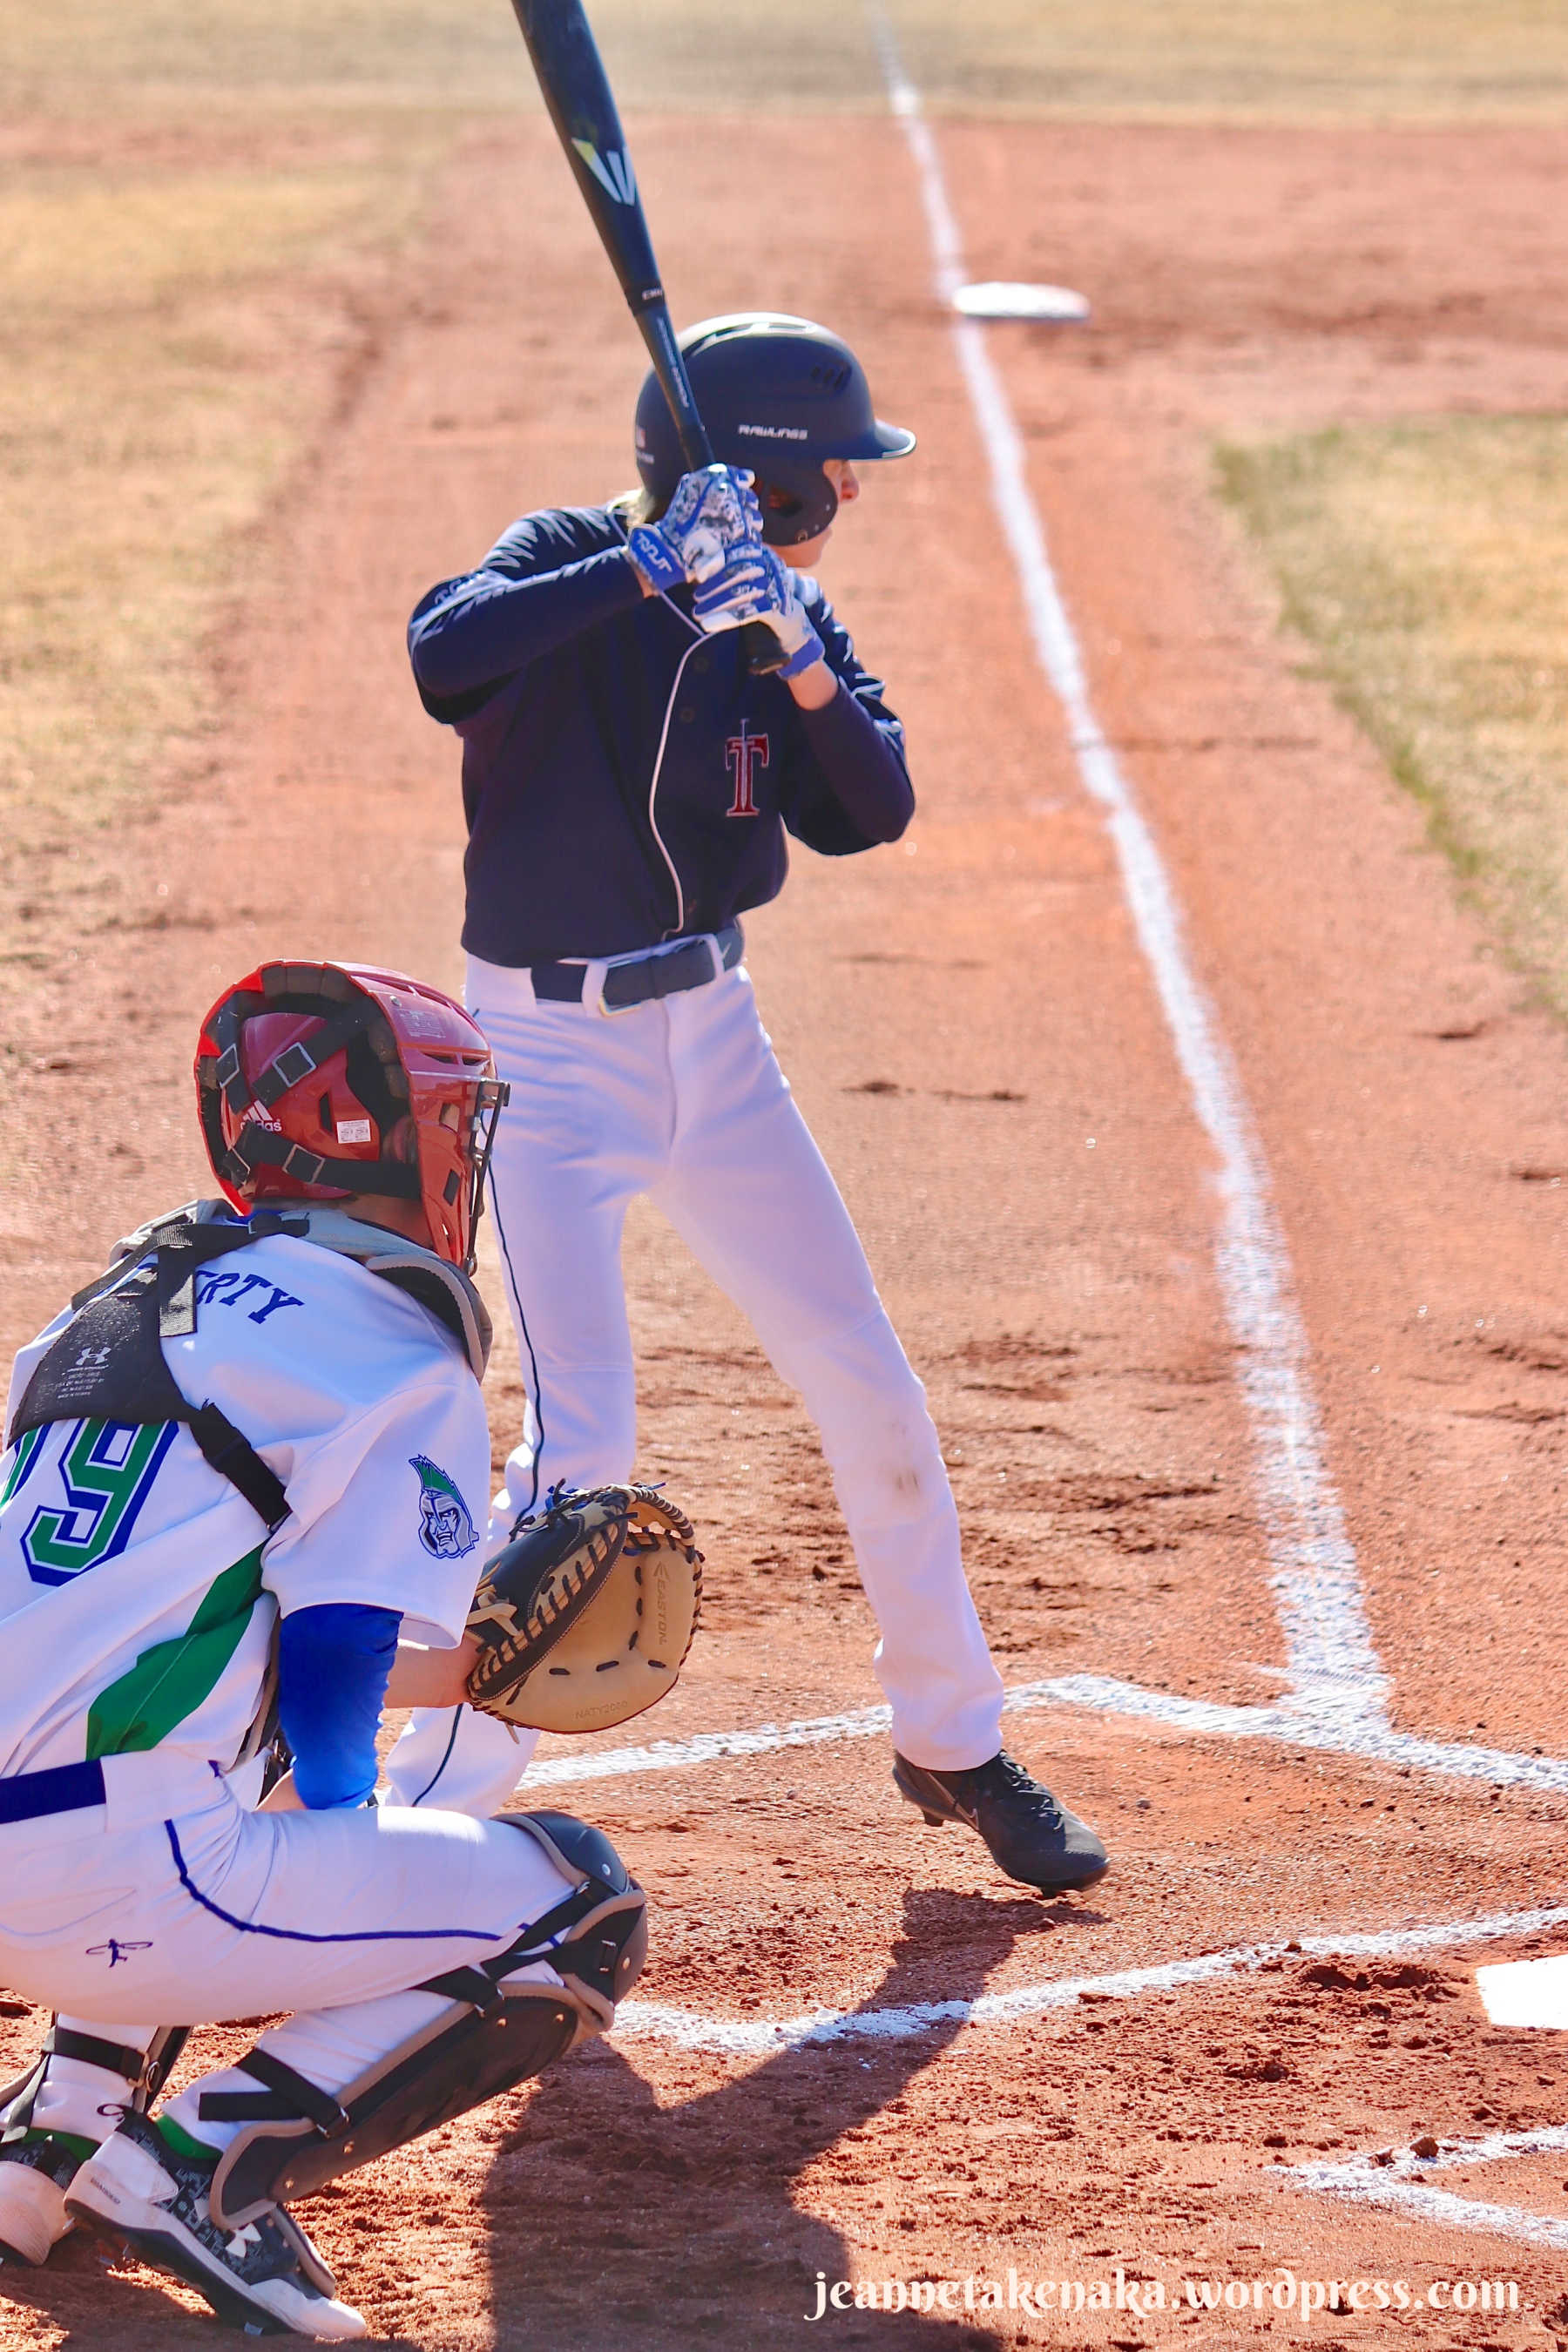 Perspective: Boy at home plate in batting position